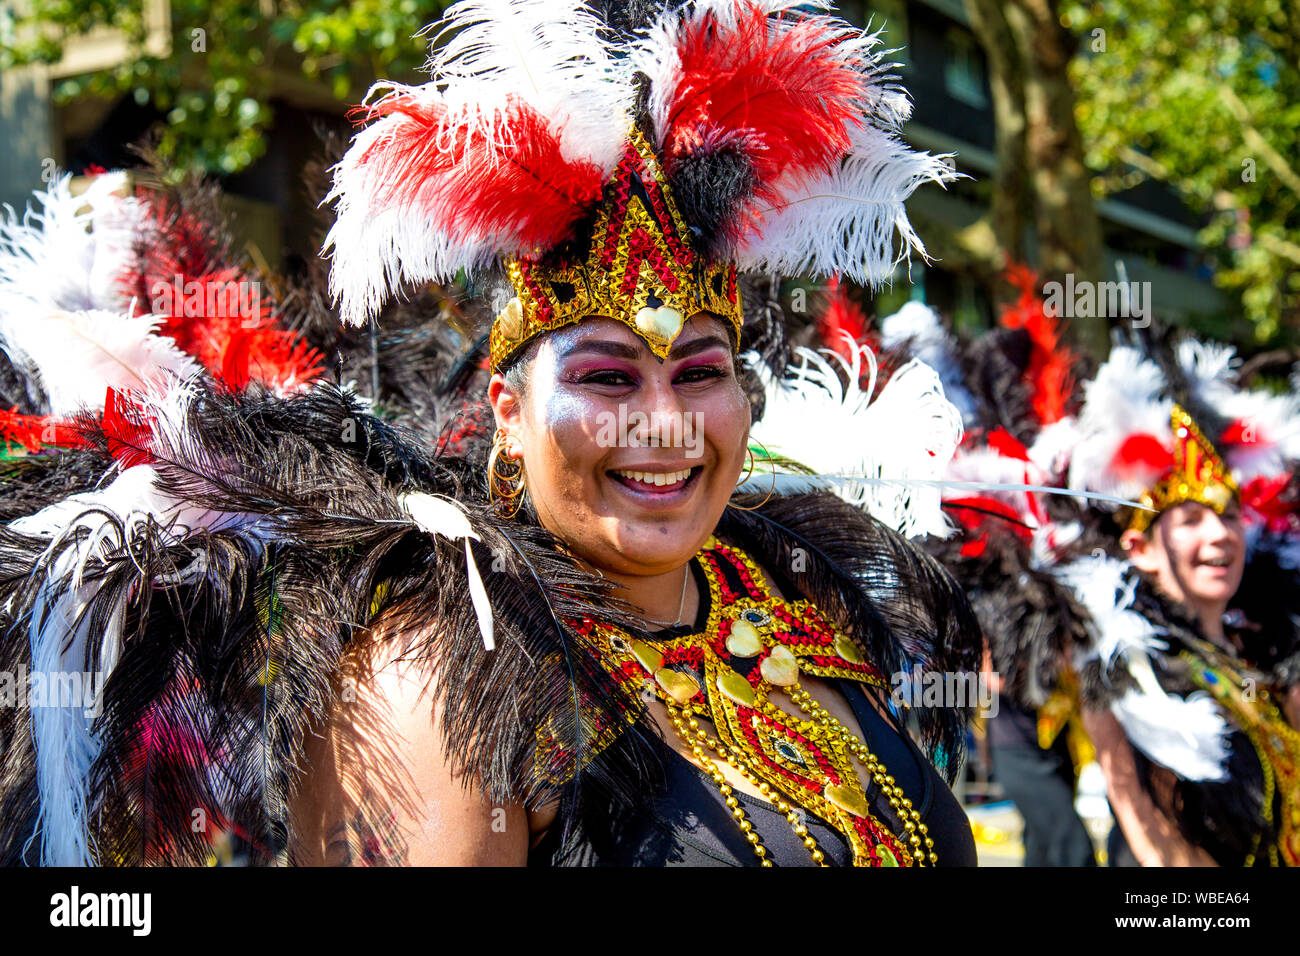 26 August 2019 - Dancer dressed up in a feather samba headdress smiling at Notting Hill Carnival on a hot Bank Holiday Monday, London, UK Stock Photo